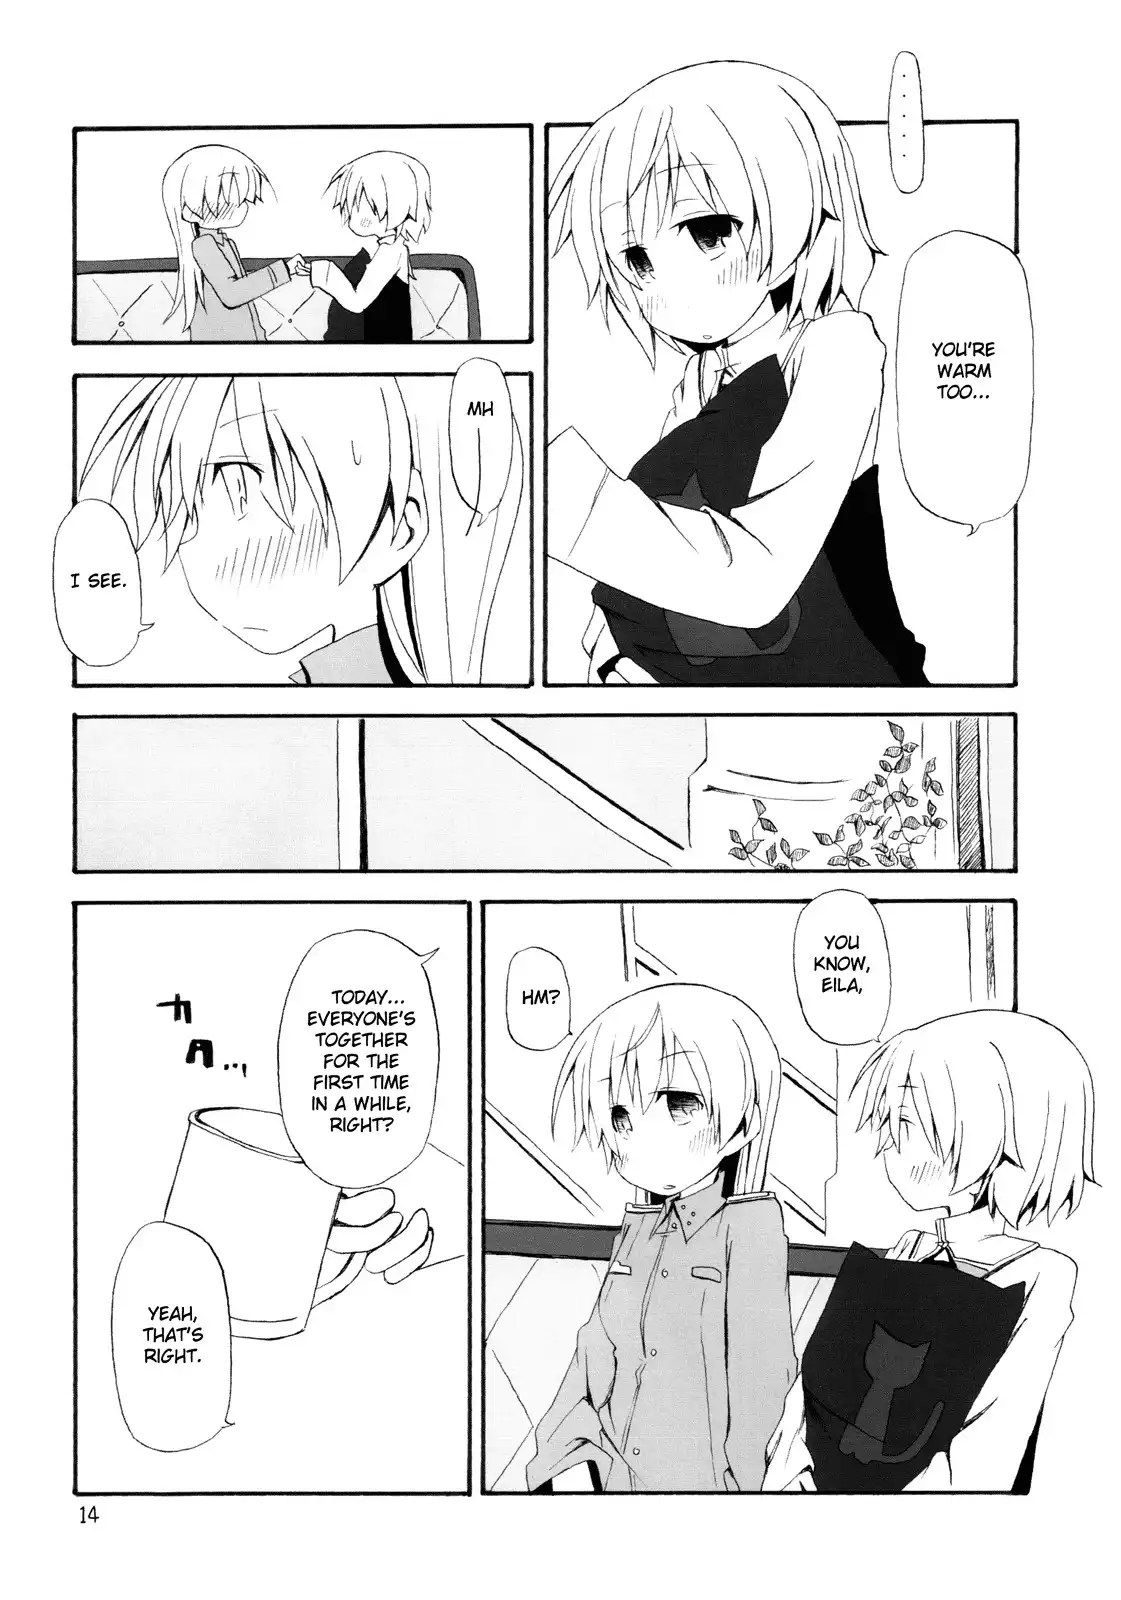 Strike Witches - Go Hppy! (Doujinshi) Chapter 0